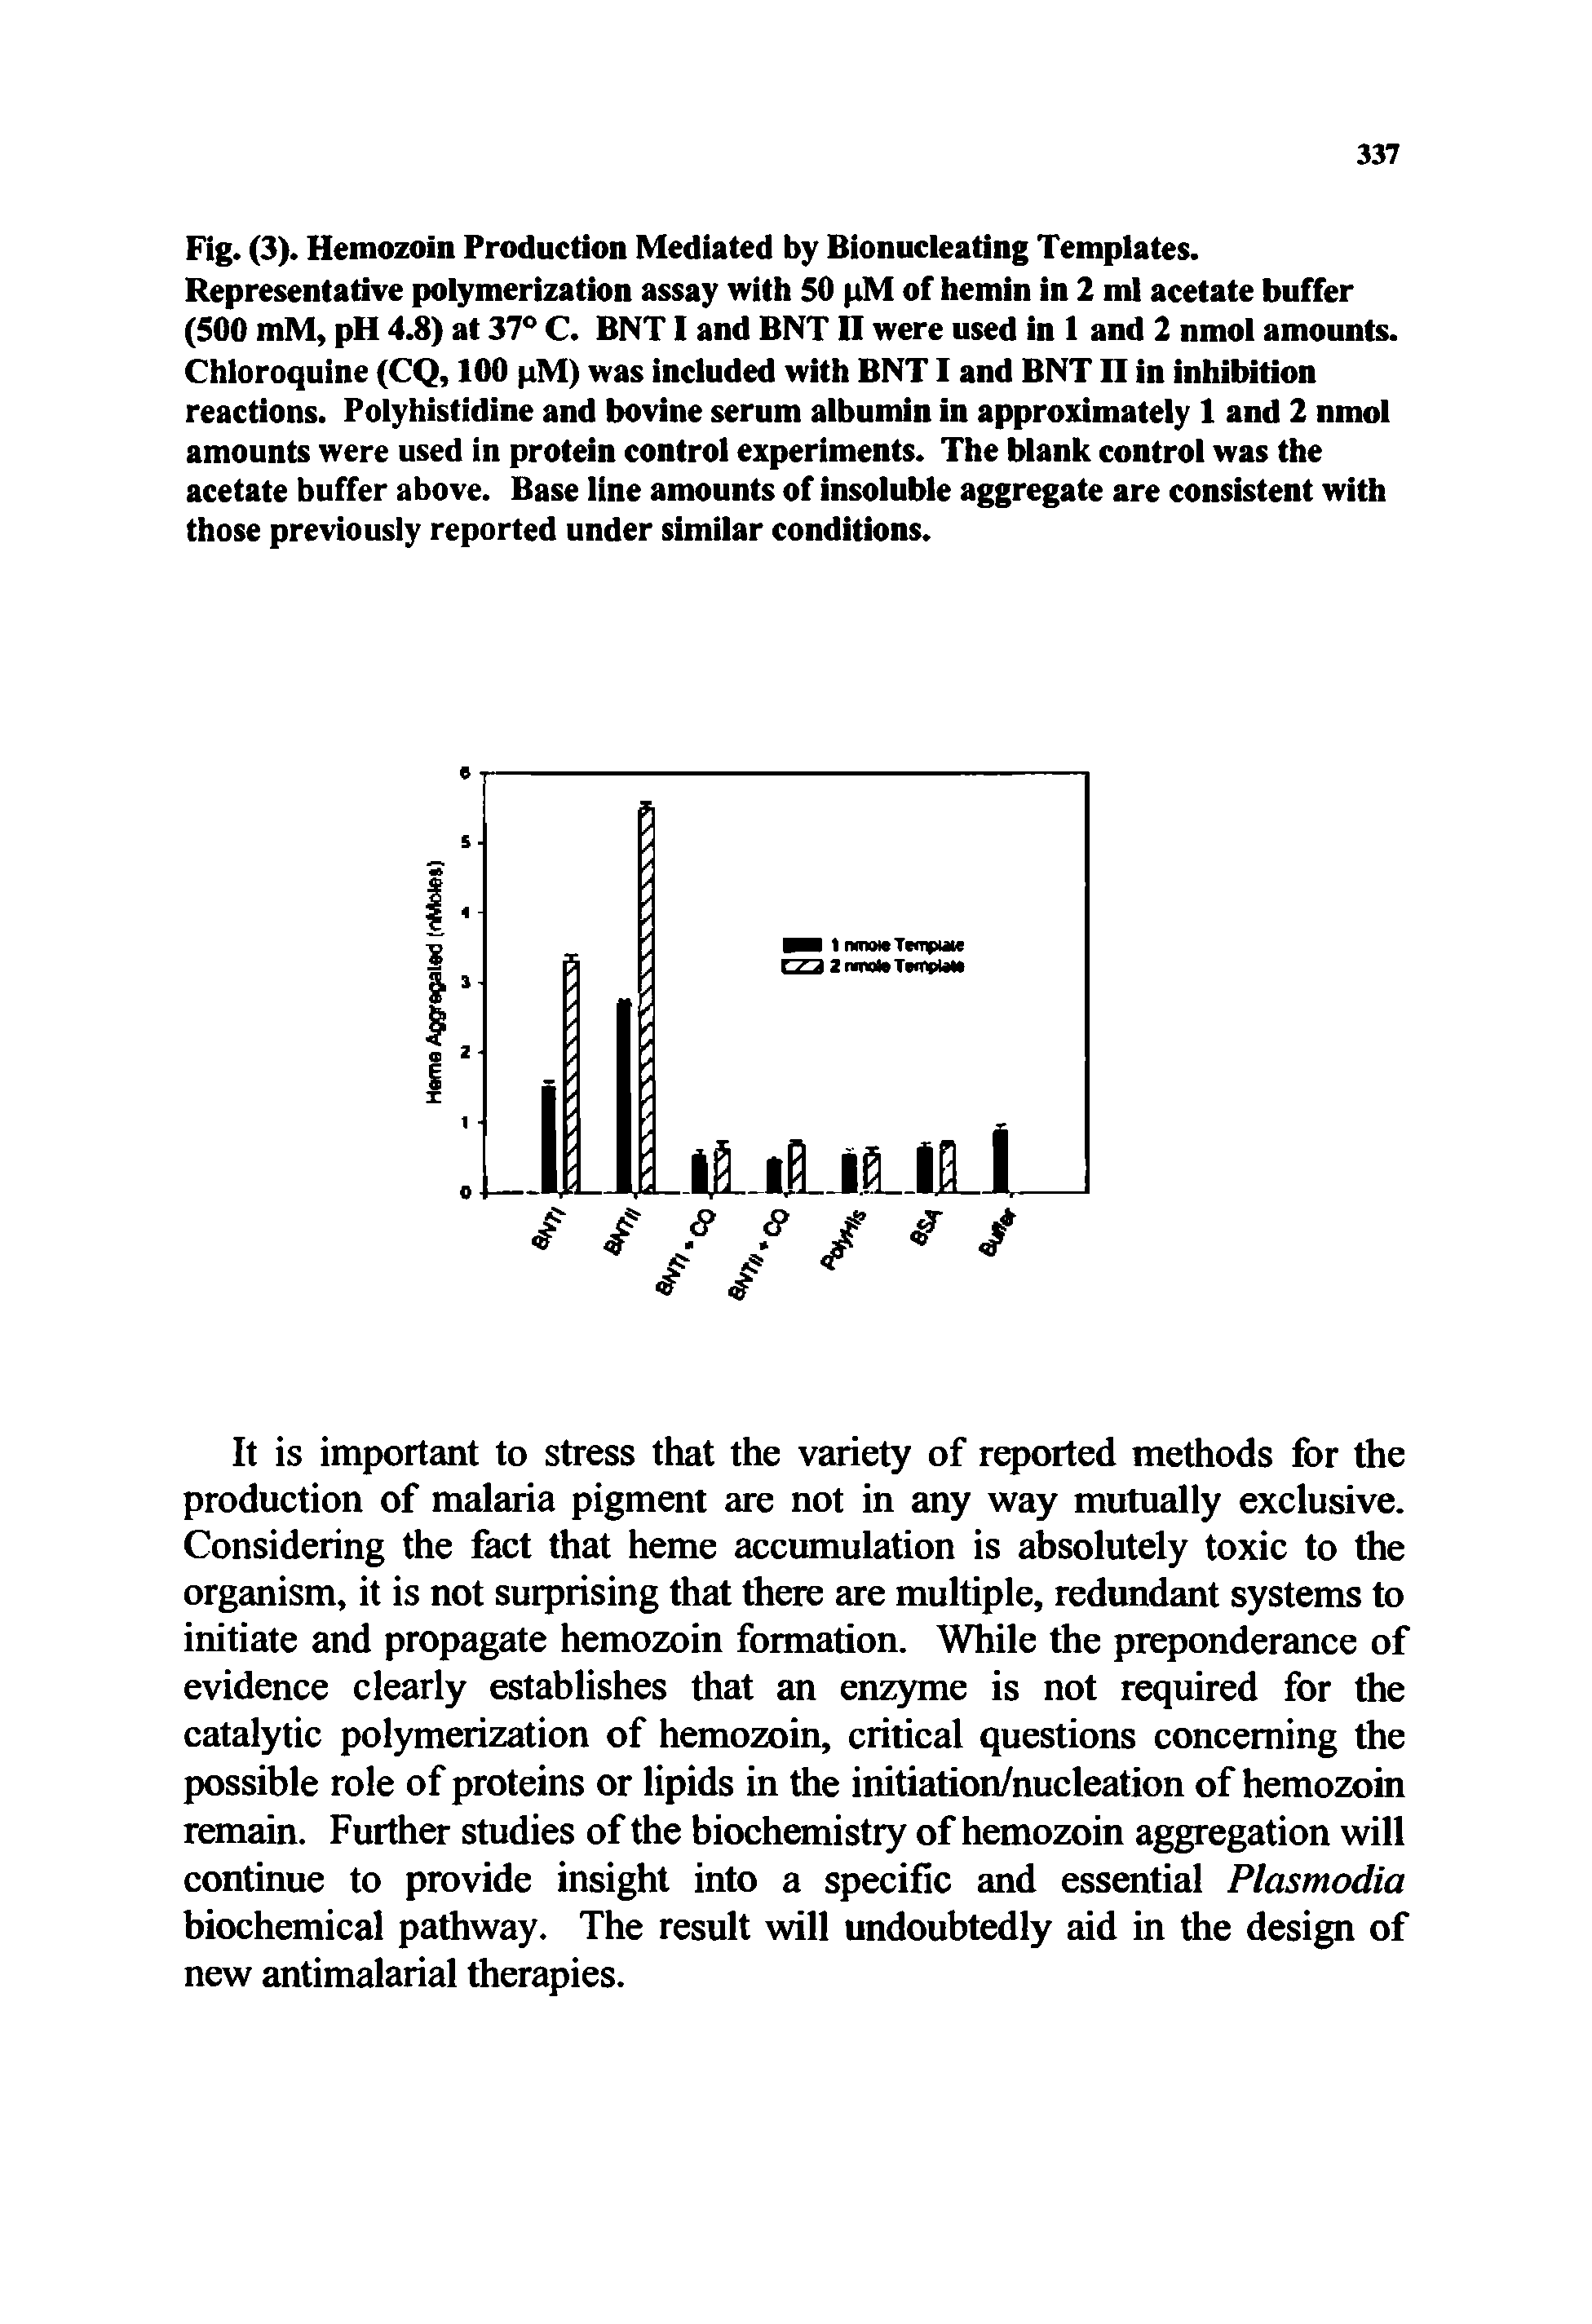 Fig. (3). Hemozoin Production Mediated by Bionucleating Templates. Representative polymerization assay with 50 pM of hemin in 2 ml acetate buffer (500 mM, pH 4.8) at 37° C. BNTI and BNTII were used in 1 and 2 nmol amounts. Chloroquine (CQ, 100 pM) was included with BNT I and BNT n in inhibition reactions. Polyhistidine and bovine serum albumin in approximately 1 and 2 nmol amounts were used in protein control experiments. The blank control was the acetate buffer above. Base line amounts of insoluble aggregate are consistent with those previously reported under similar conditions.